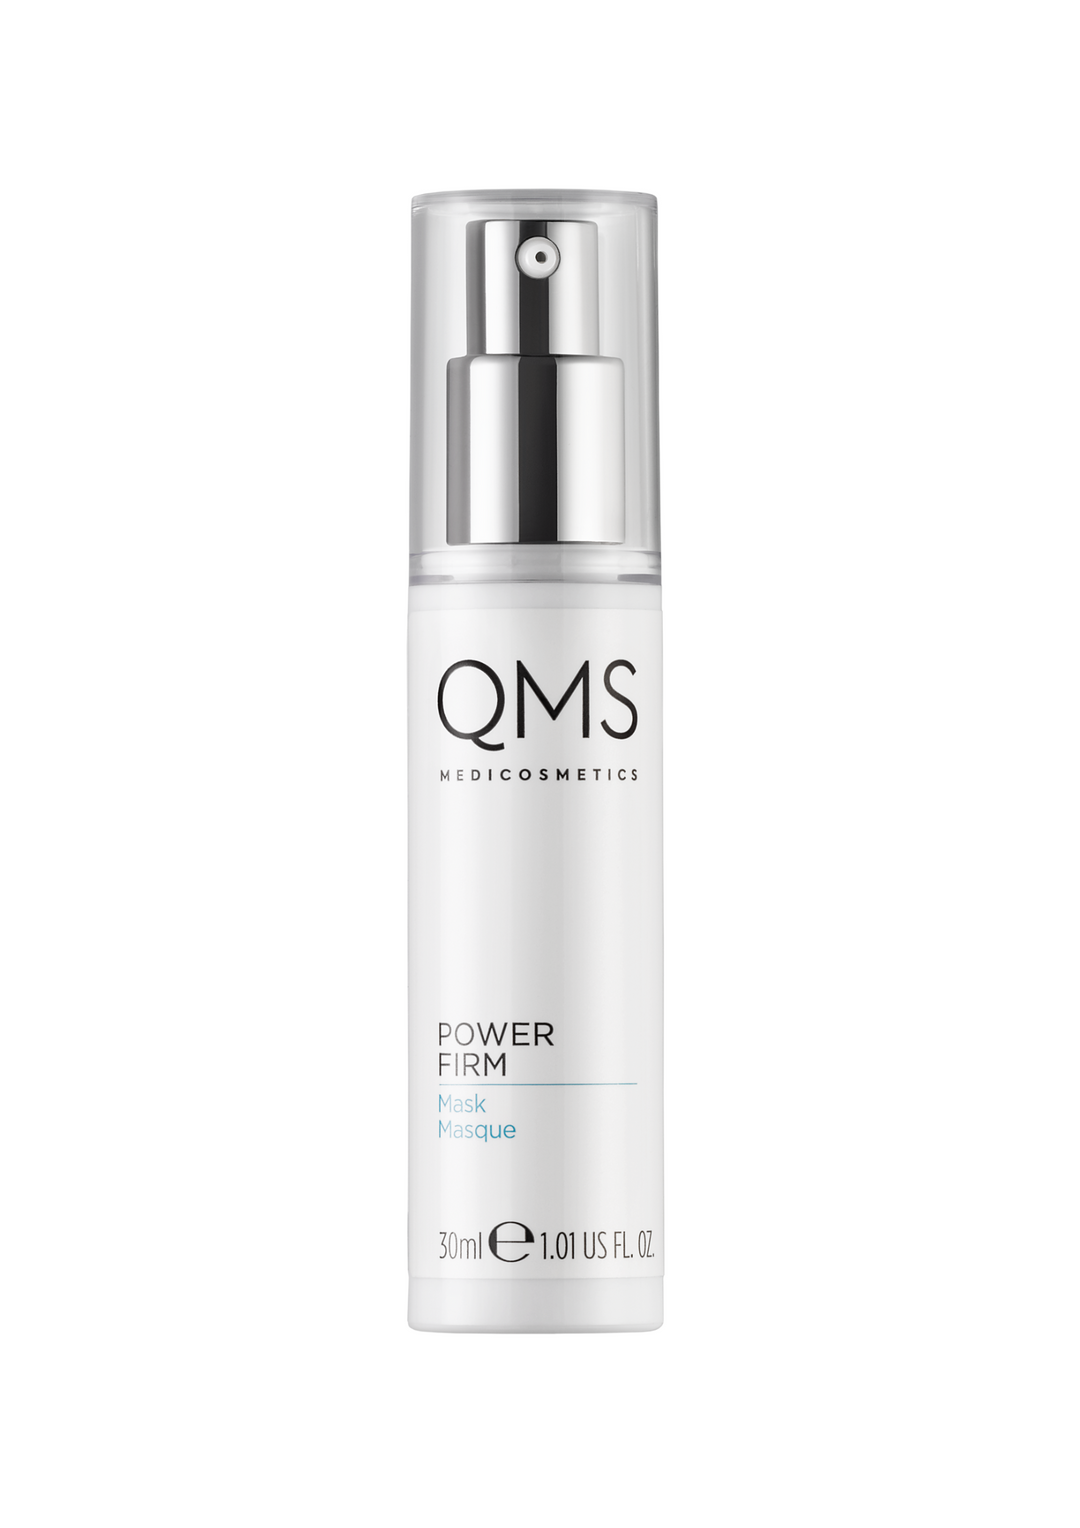 Power Firm Mask 30 ml (discover size)